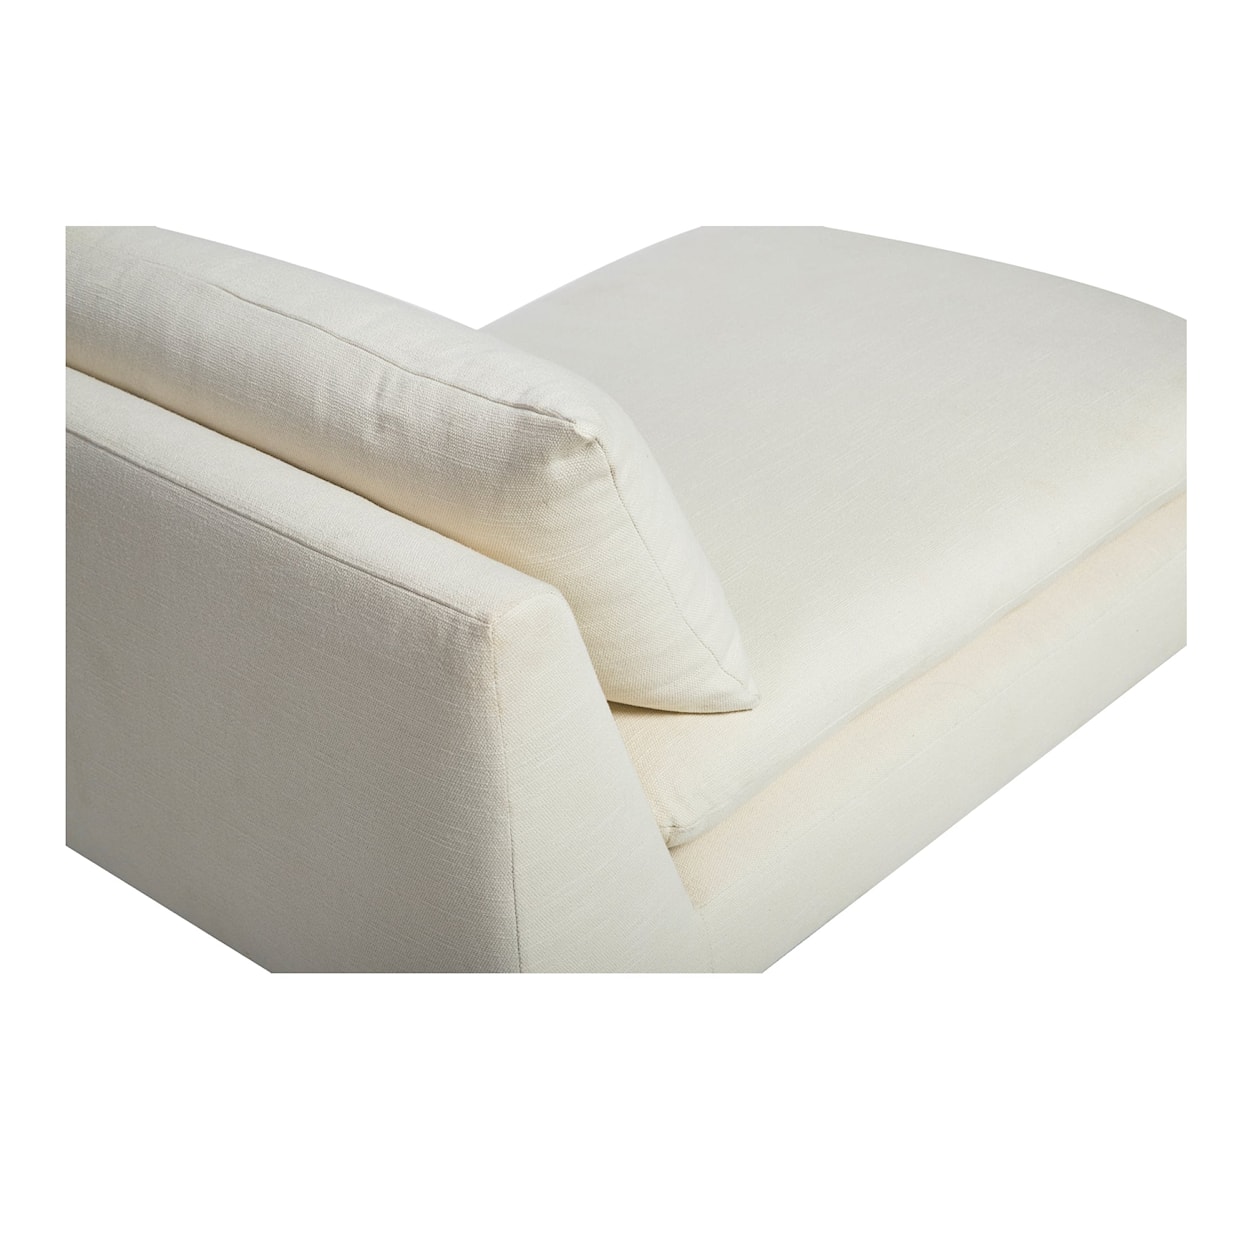 Moe's Home Collection Estelle Armless Chaise